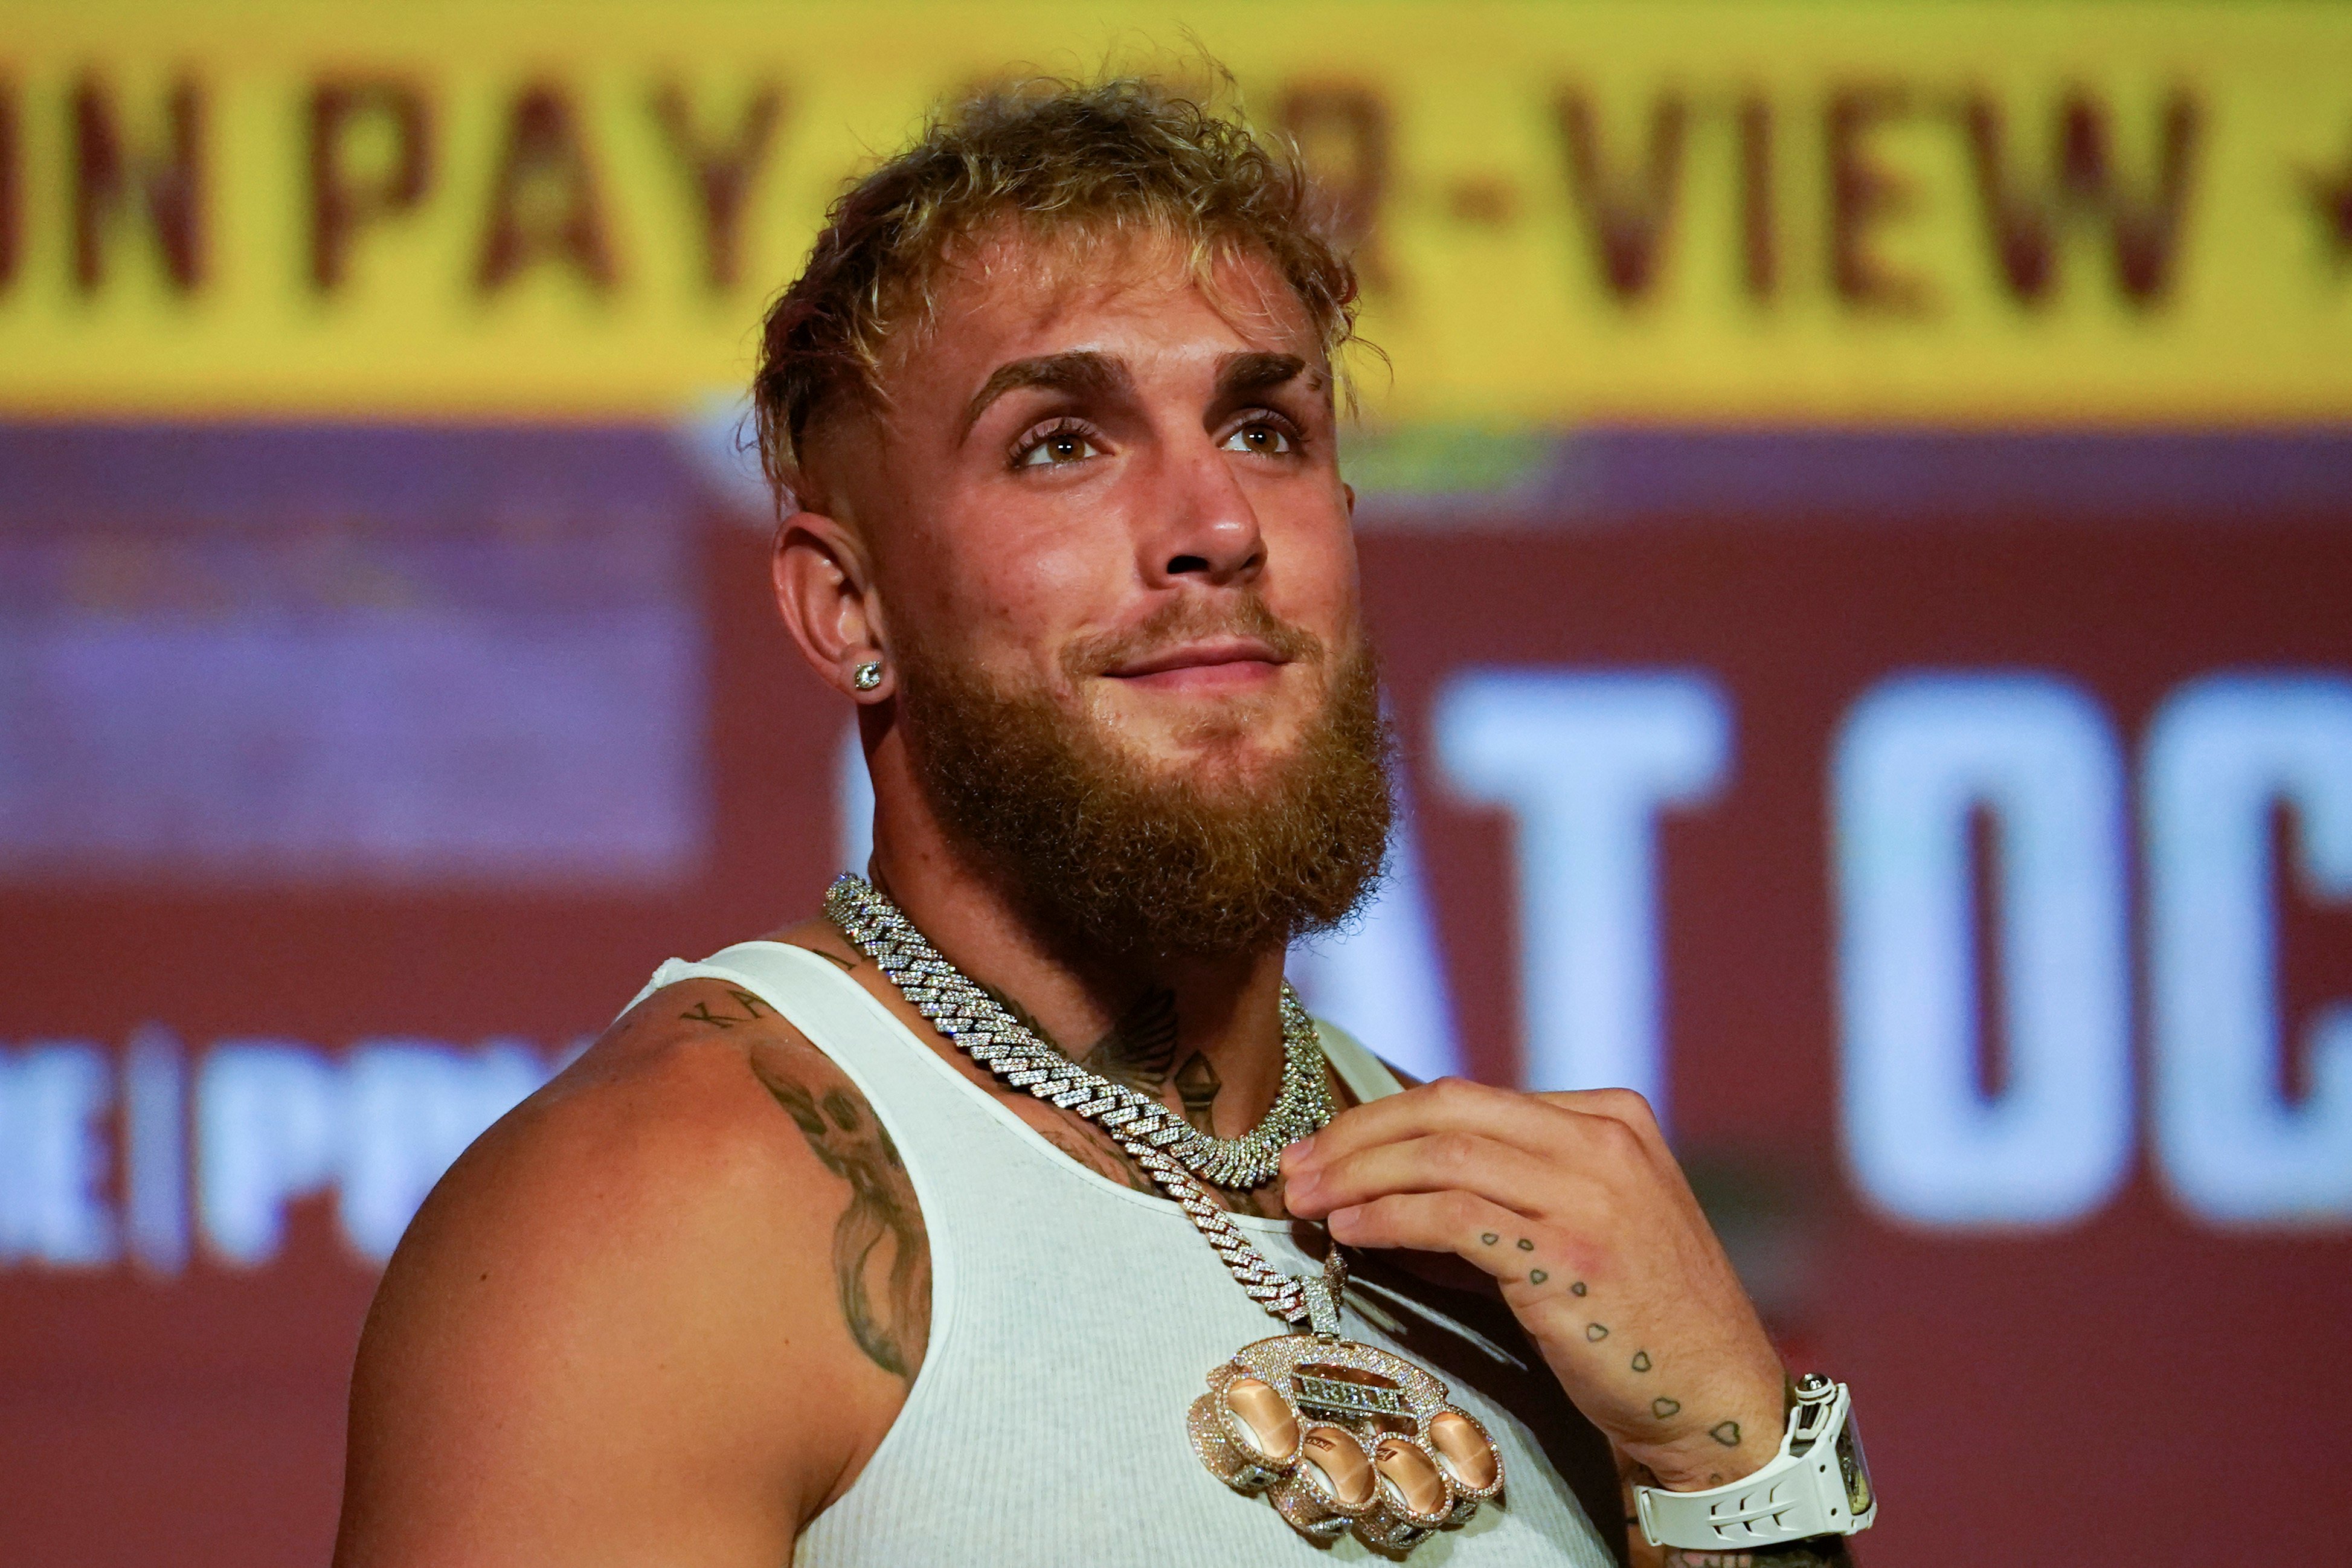 YouTube star-turned-boxer Jake Paul (pictured) will fight former heavyweight champion Mike Tyson on July 20 at the AT&T Stadium in Texas, with the exhibition match to be livestreamed on Netflix. Photo: AP Photo